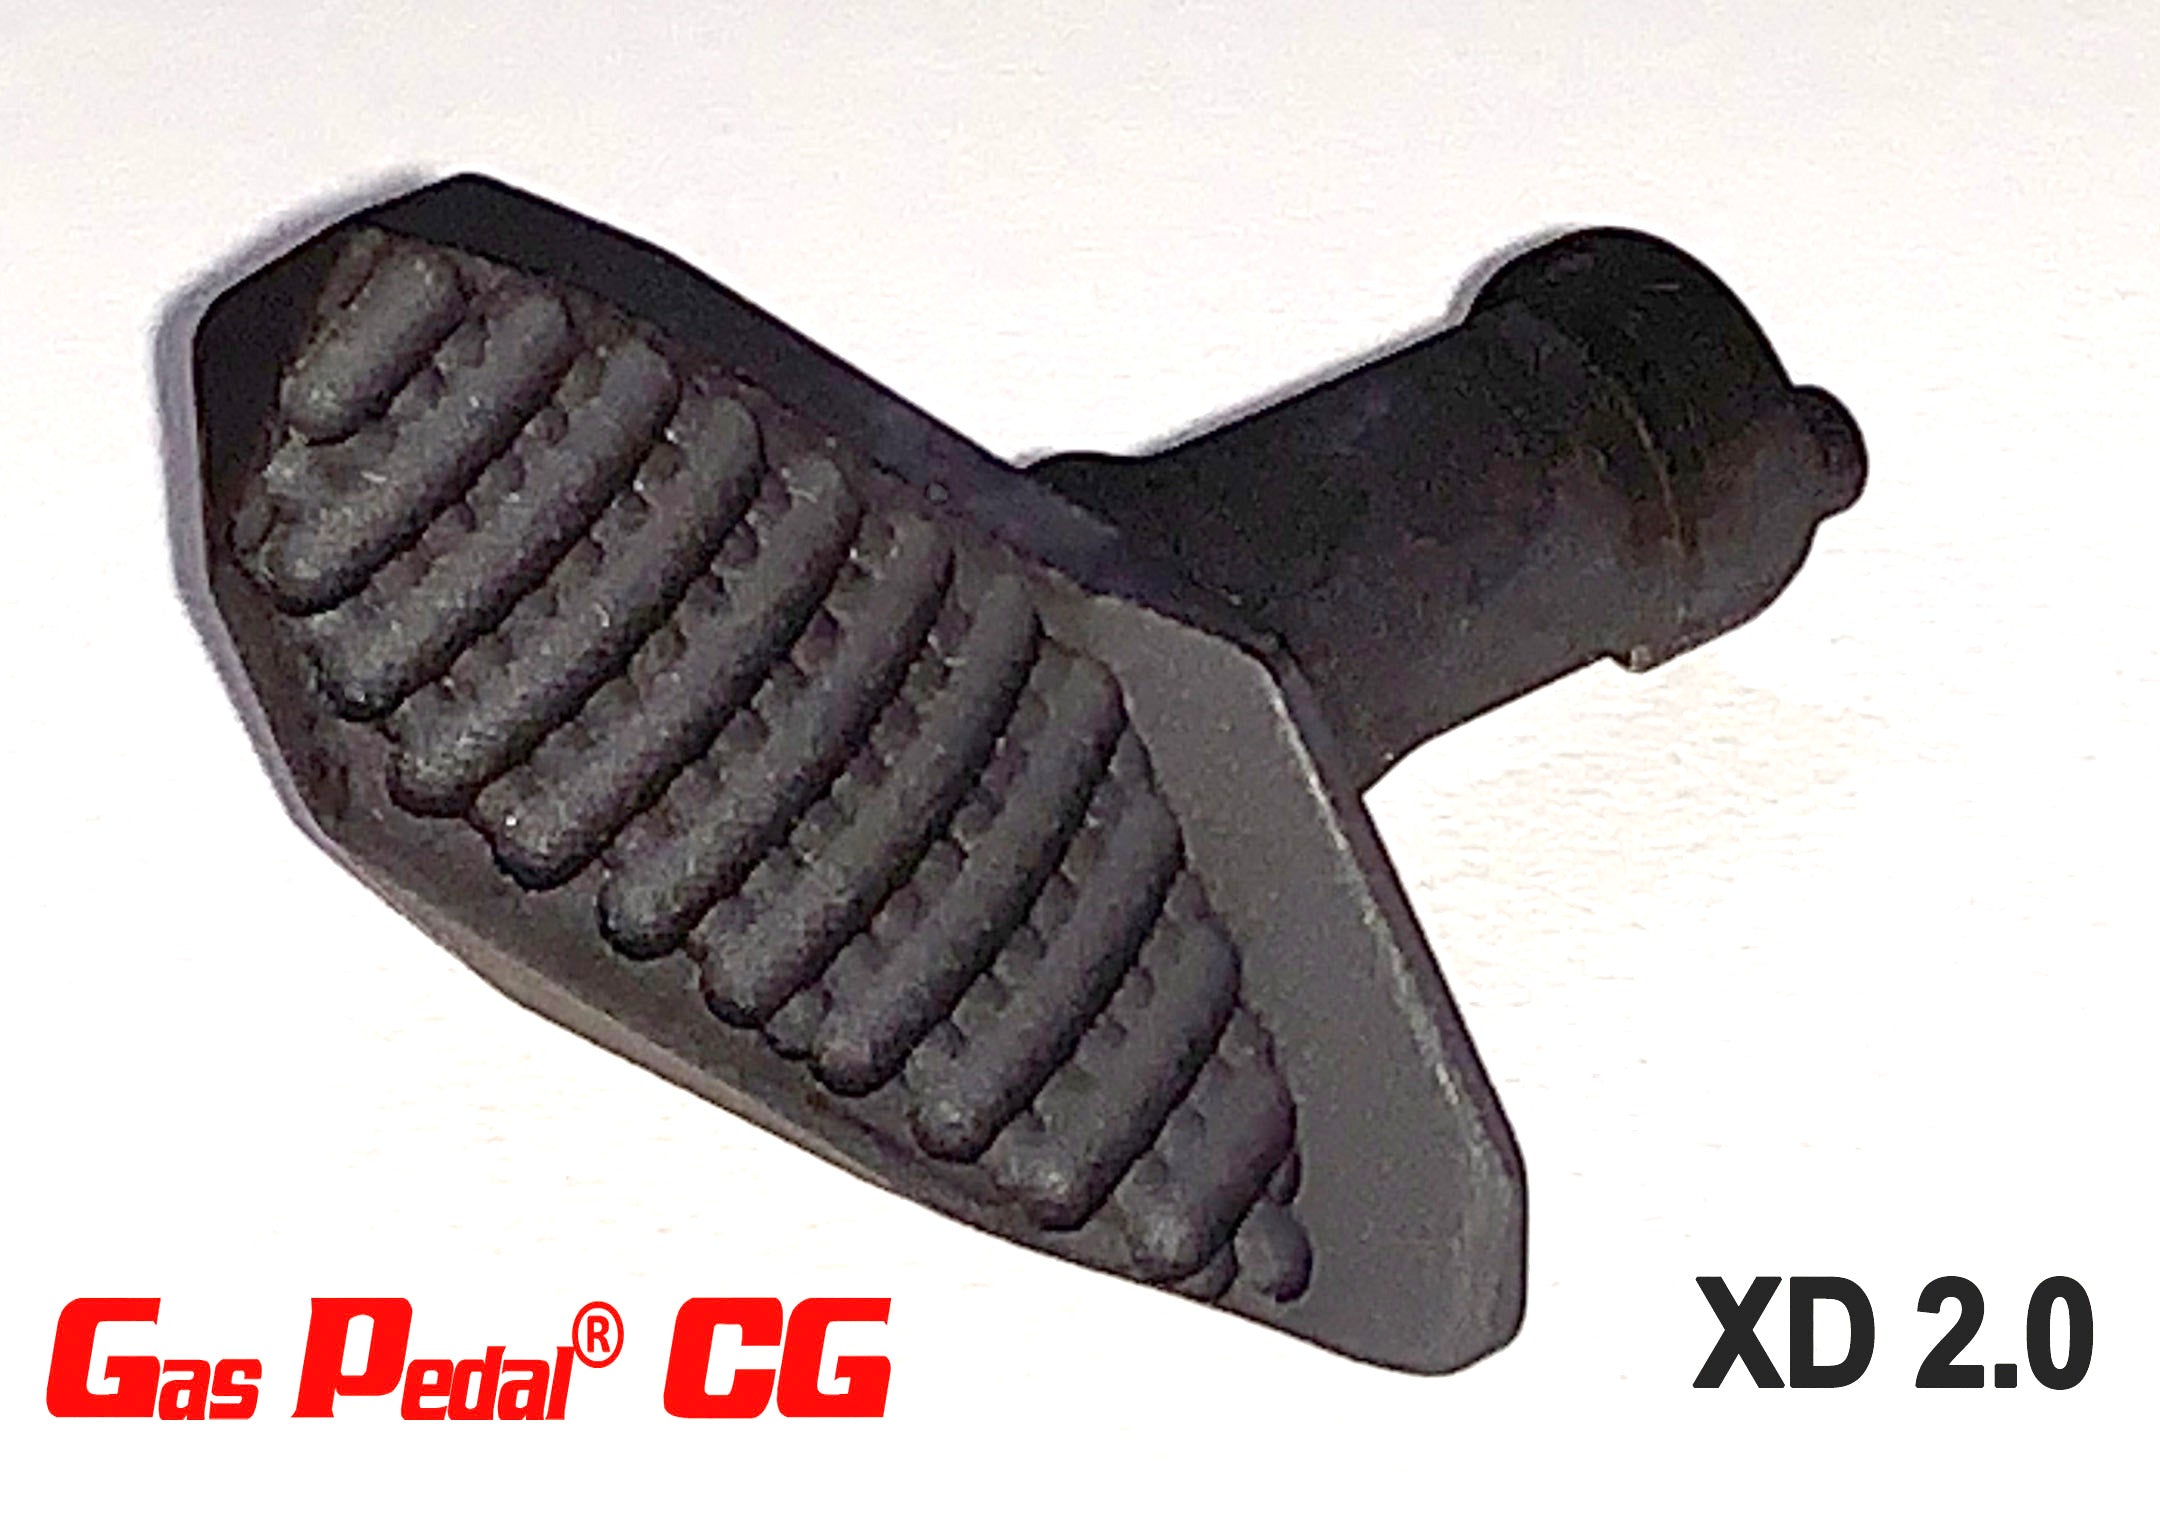  Gas Pedal Springfield XD 2.0 